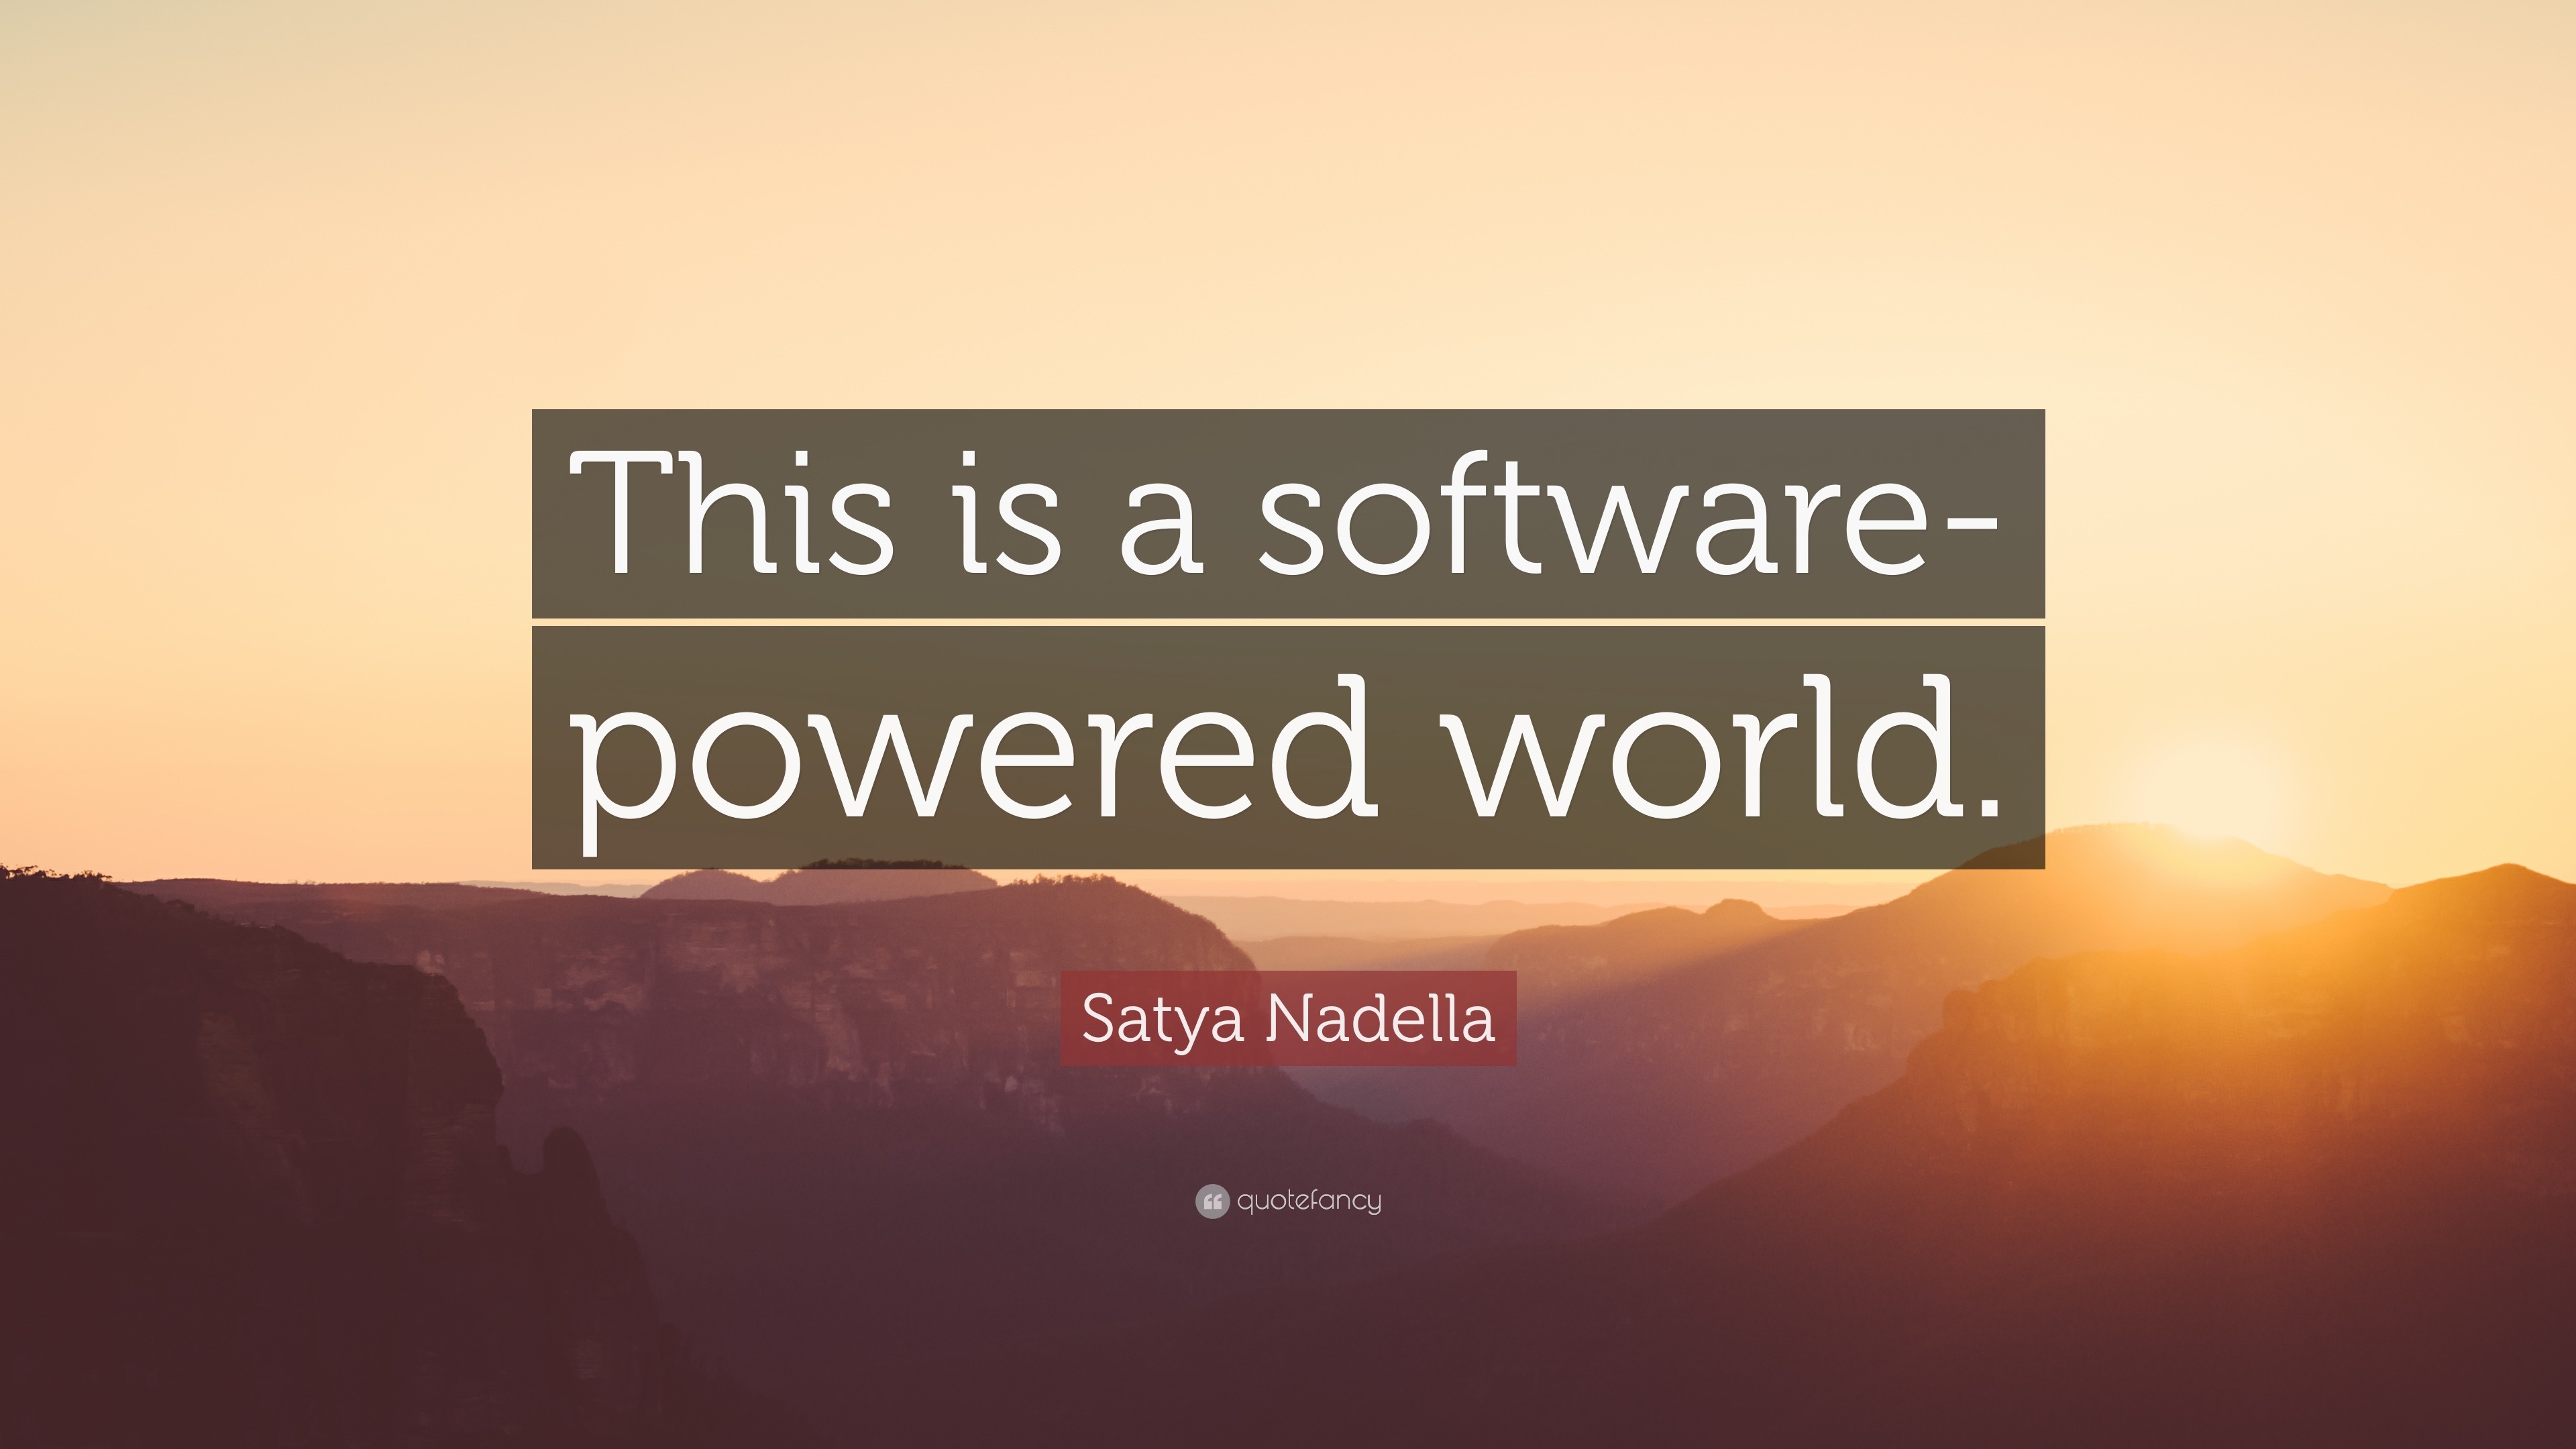 Satya Nadella Quote: “This is a software-powered world.”